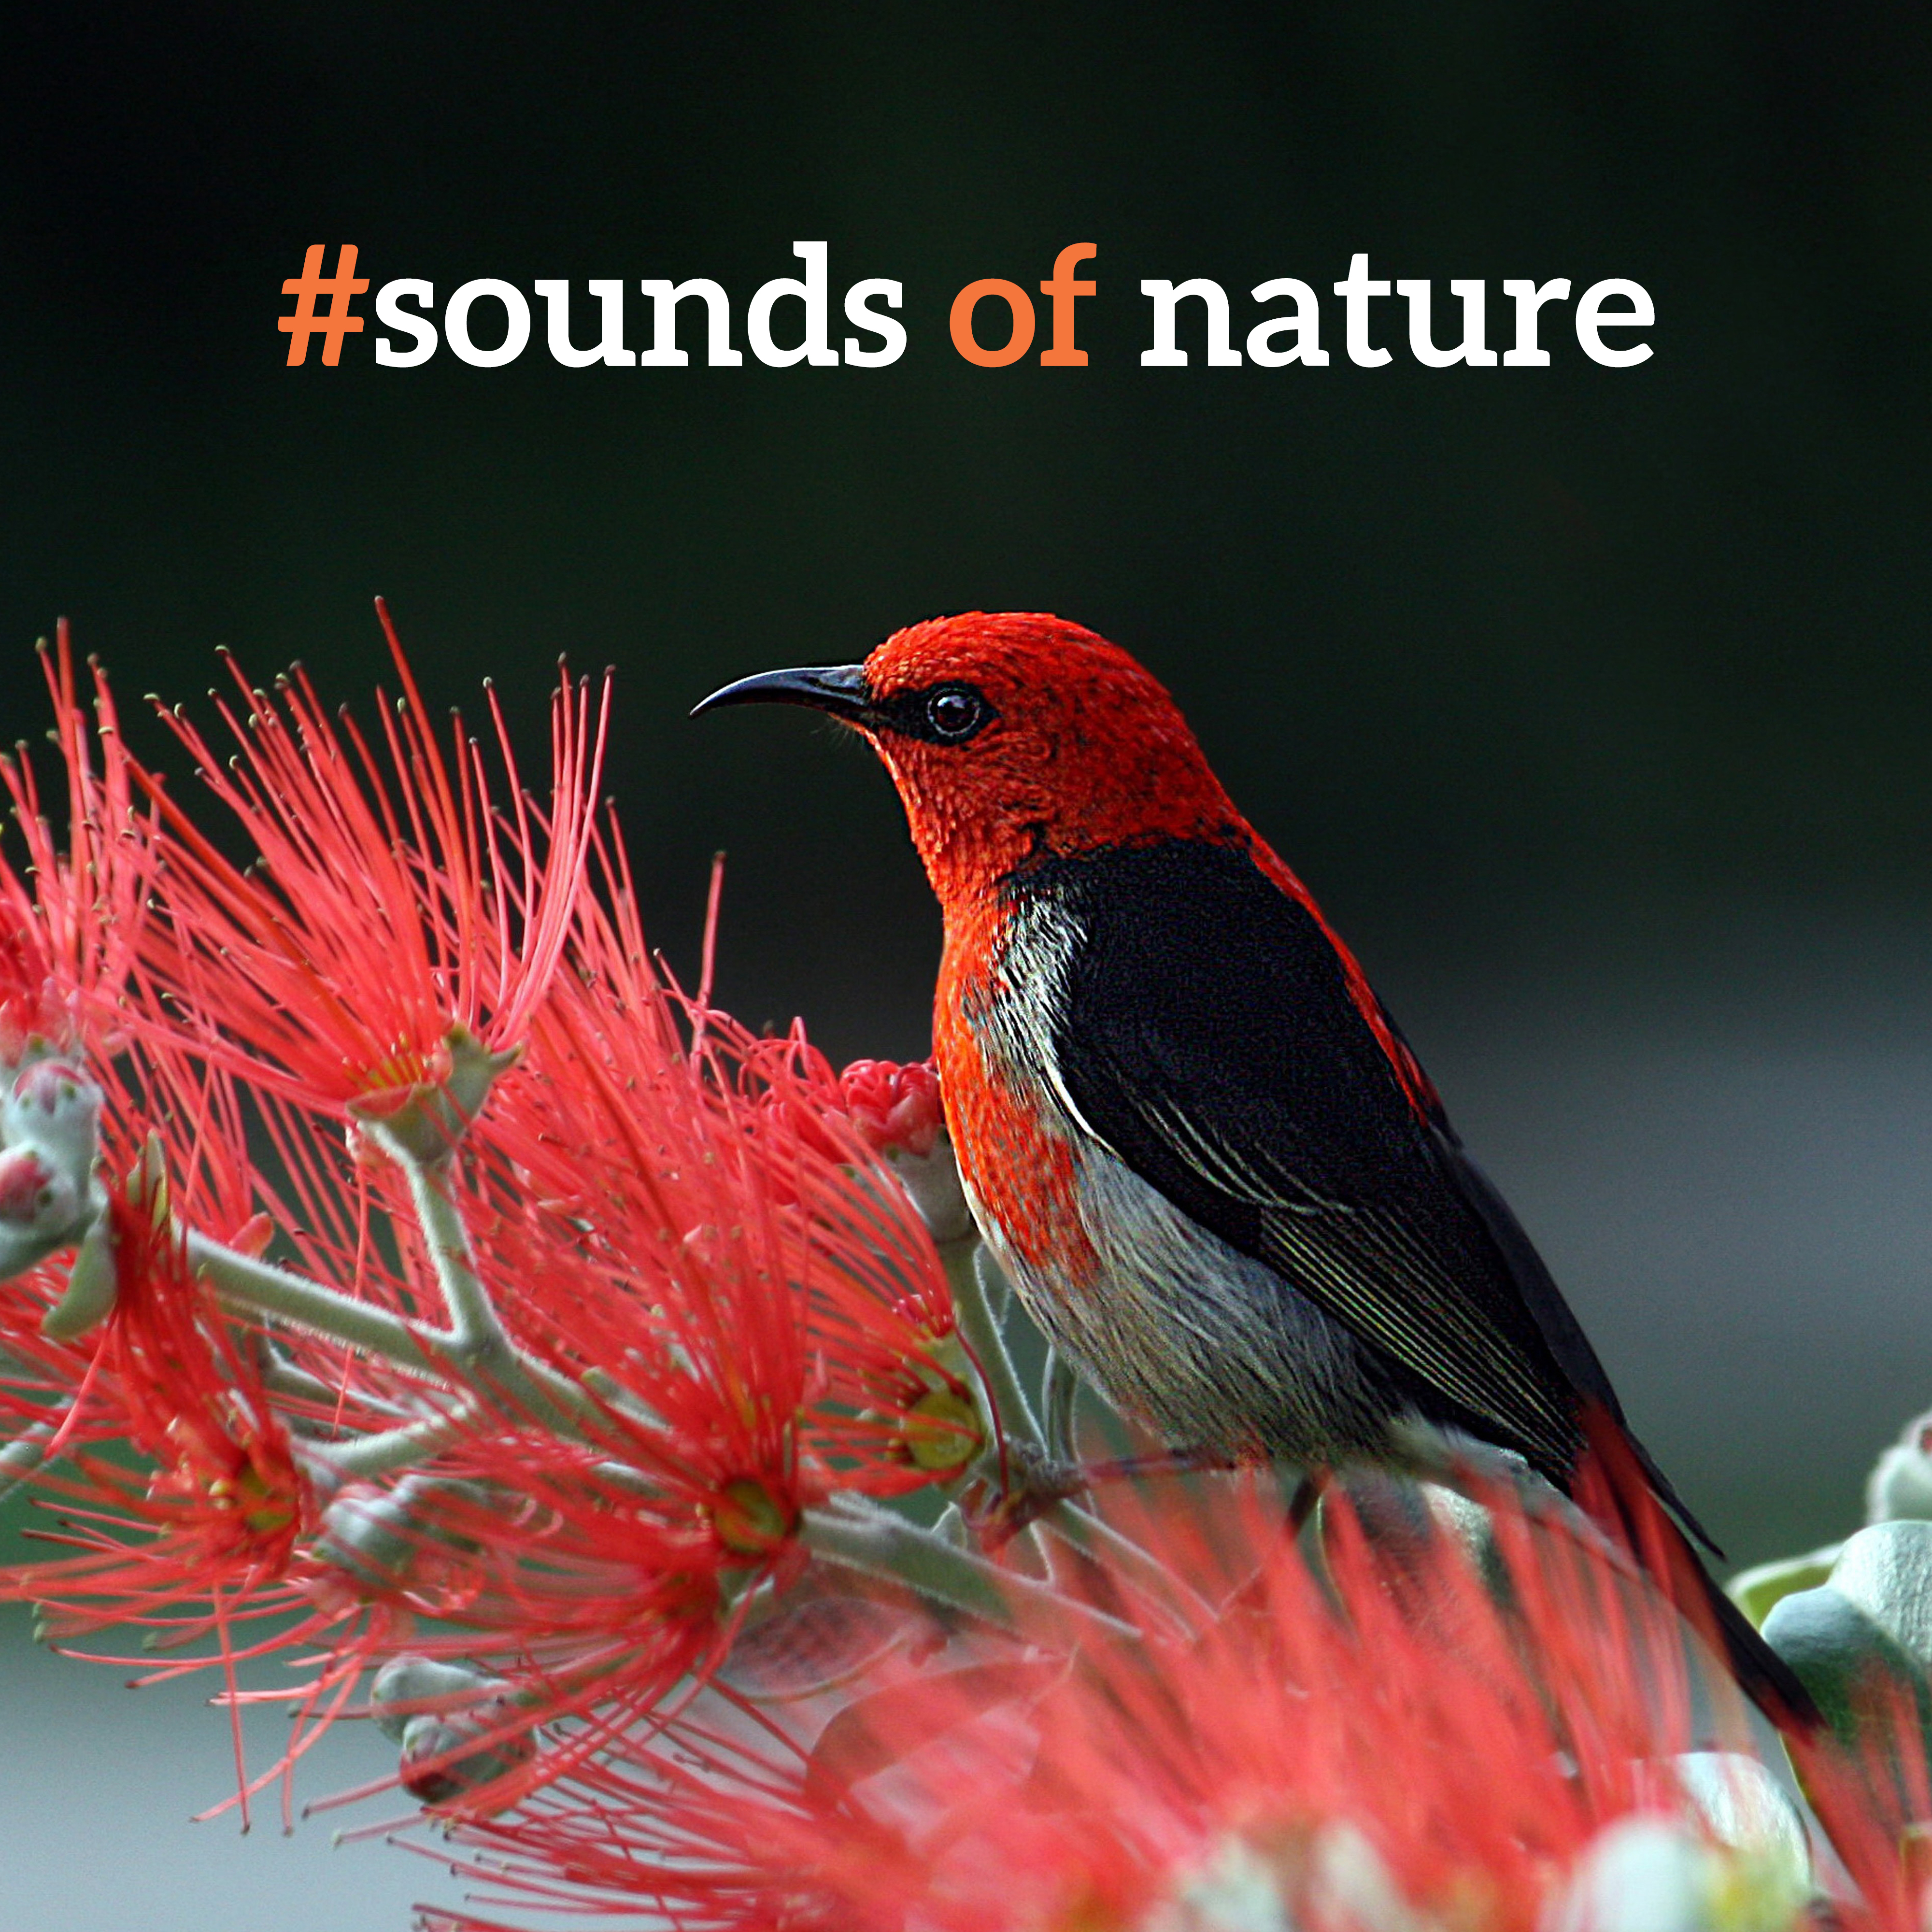 #sounds of nature: Relaxing Piano, Nature Sounds for Rest, Sleep, Deep Meditation, Inner Relaxation, Nature Music 2019